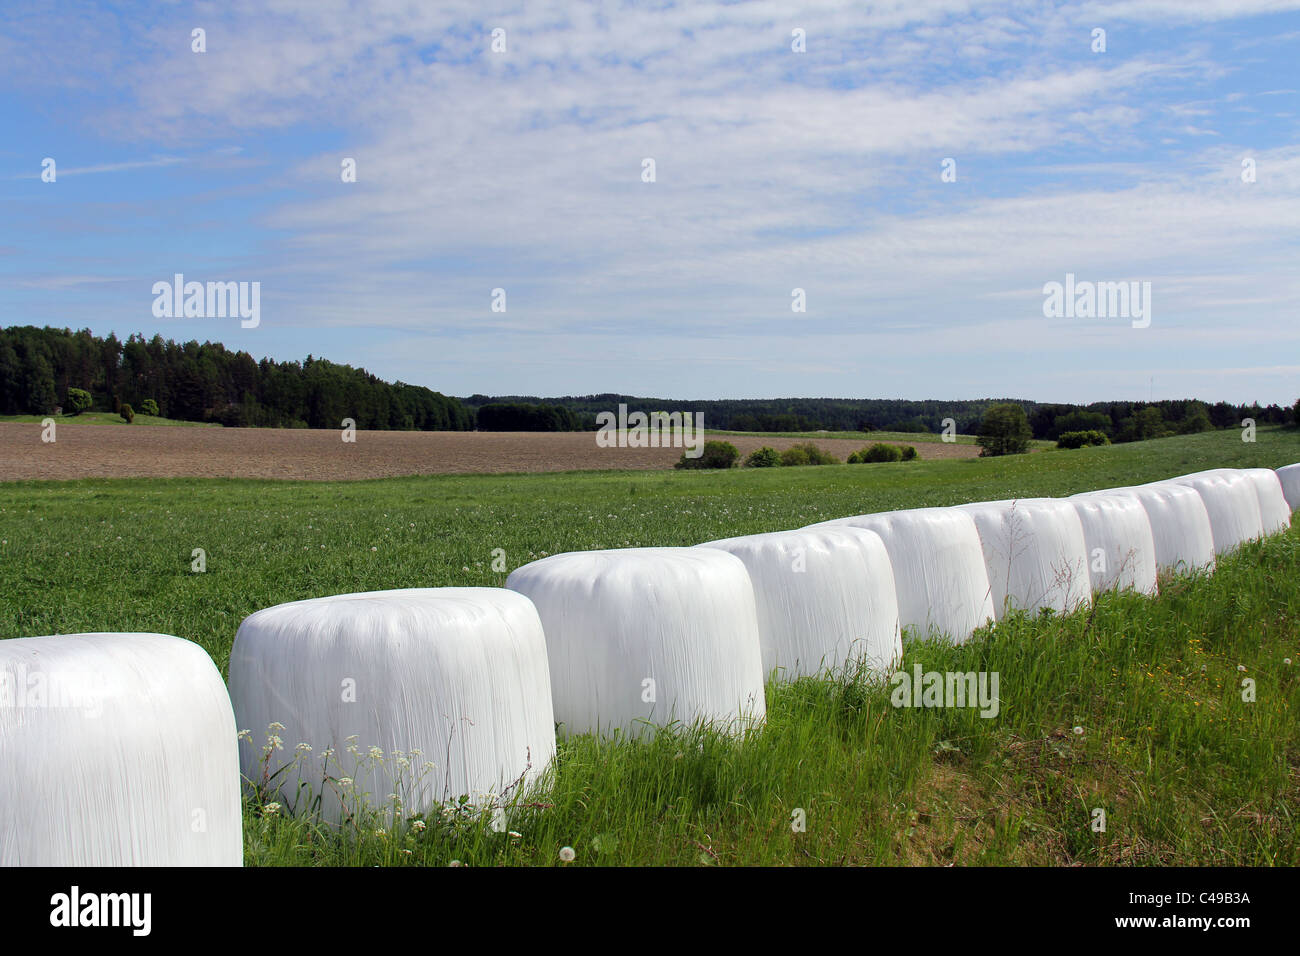 Bales of Silage on Green Field at Summer Stock Photo